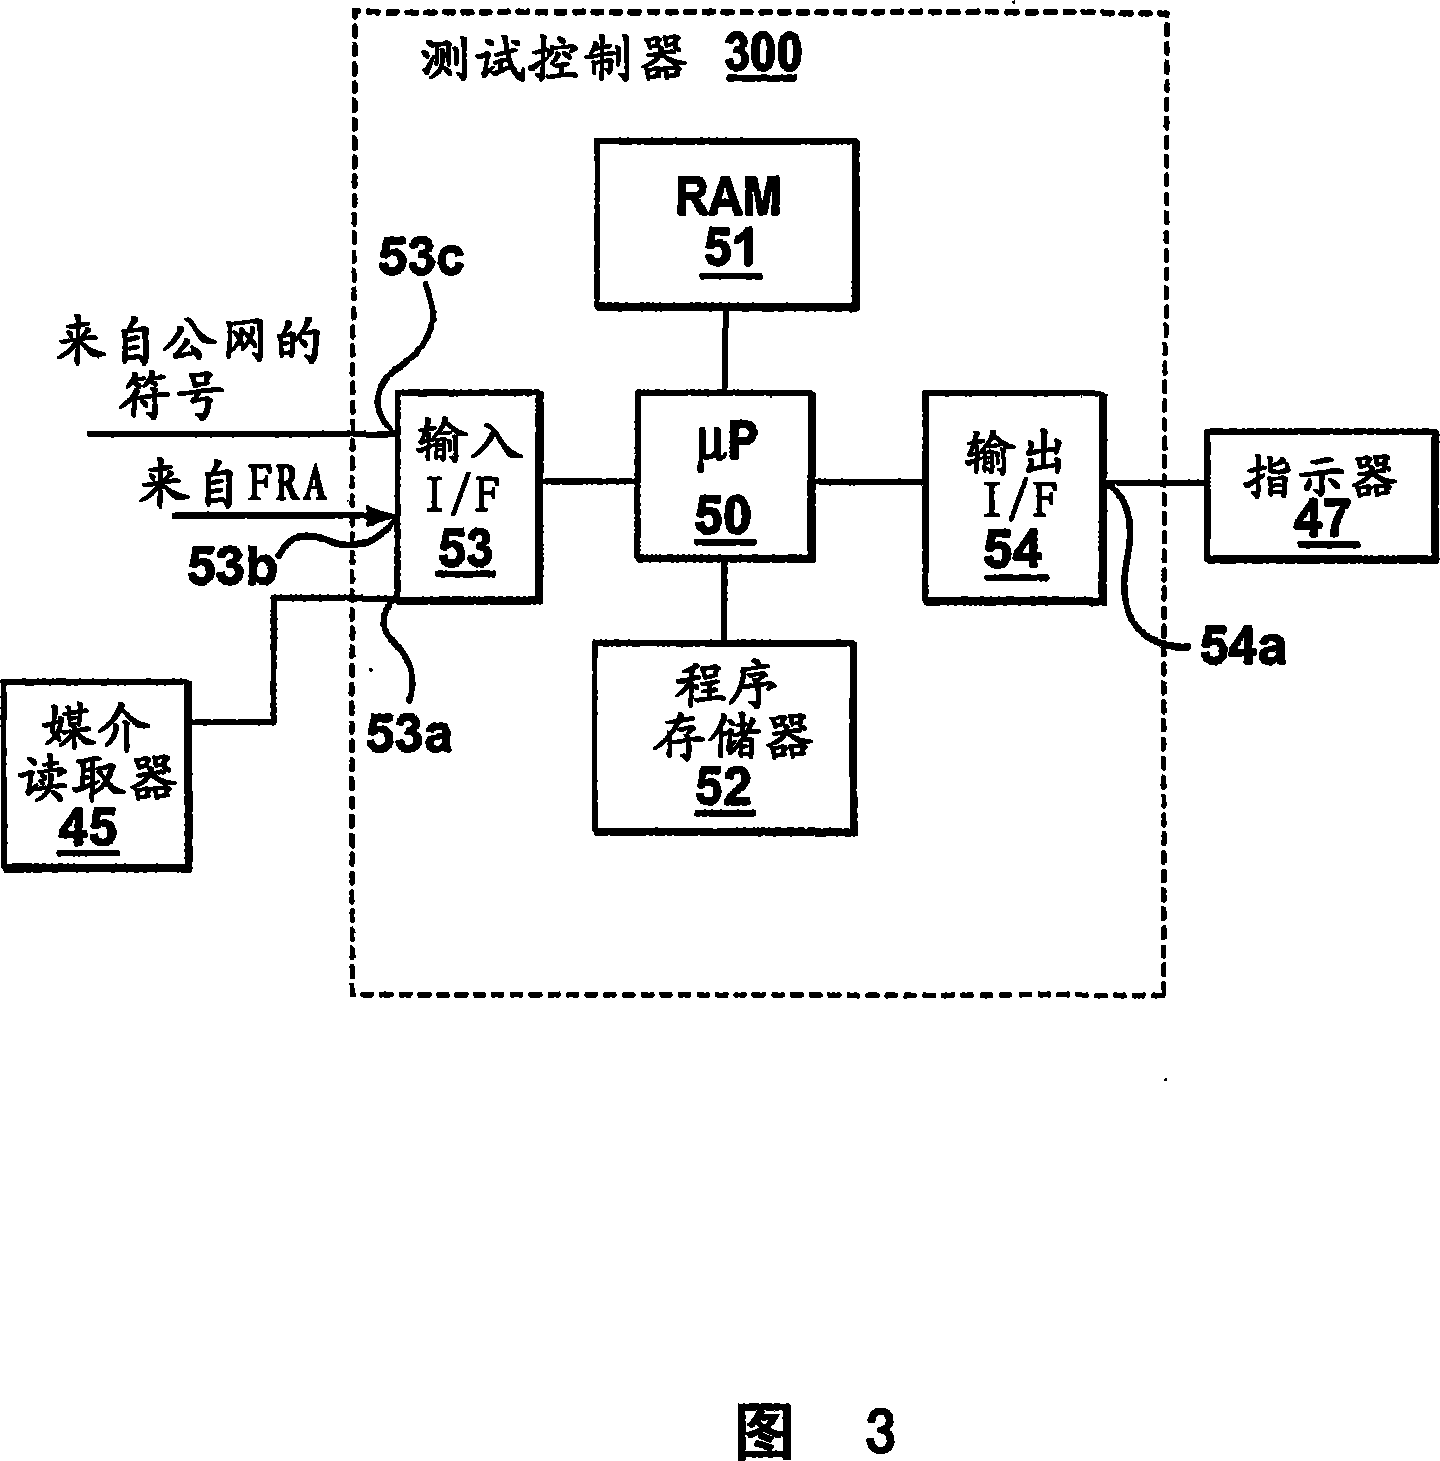 Systems and methods for detecting and indicating fault conditions in electrochemical cells